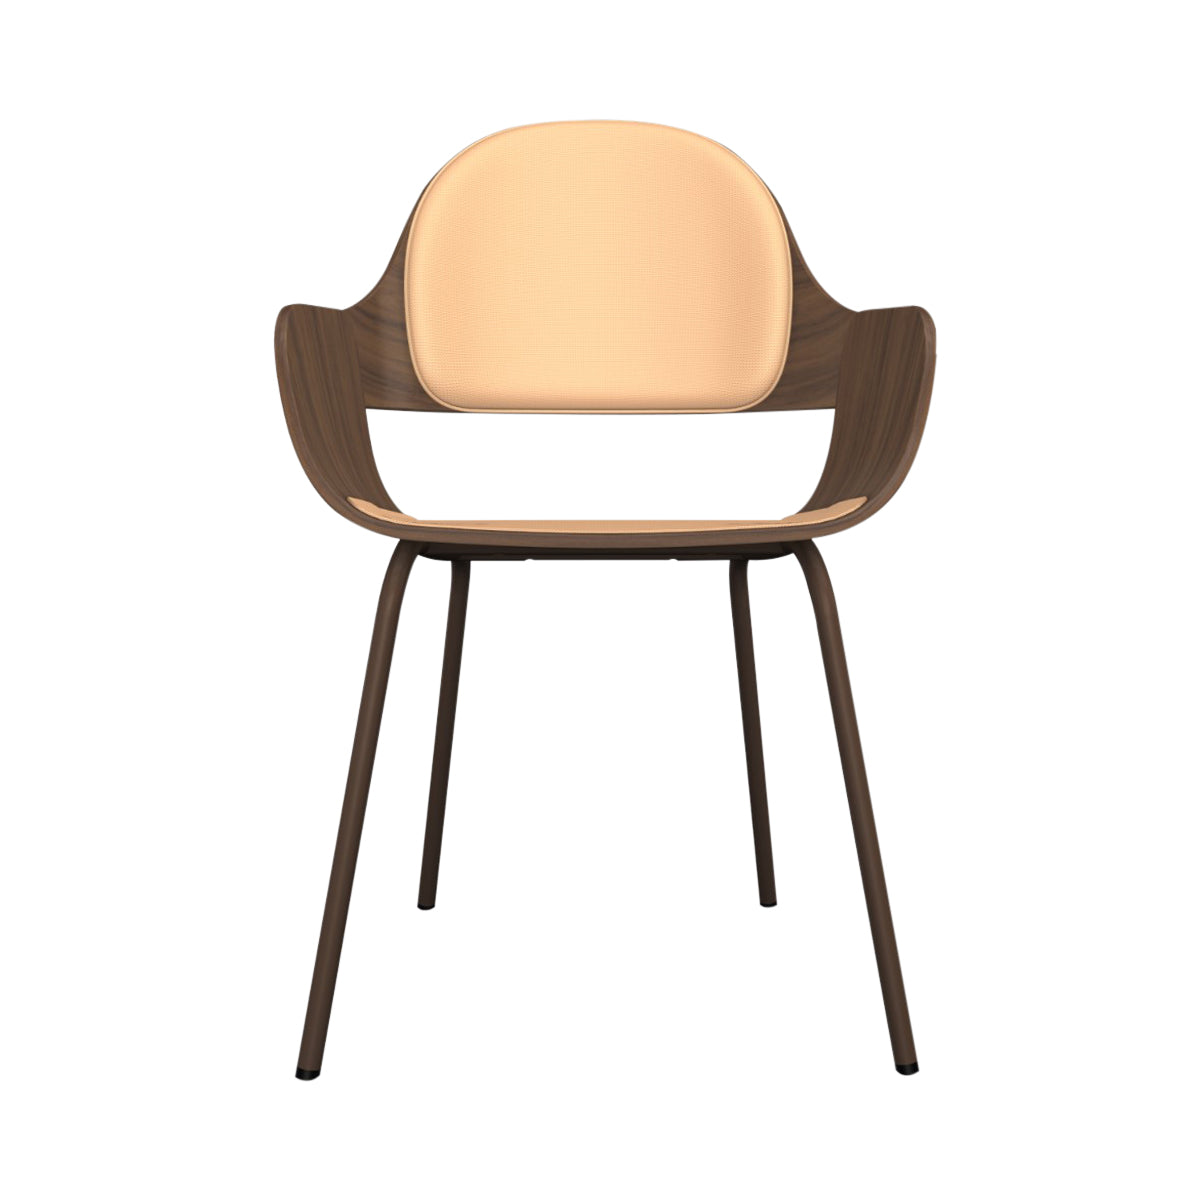 Showtime Nude Chair with Metal Base: Seat + Backrest Cushion + Walnut + Pale Brown